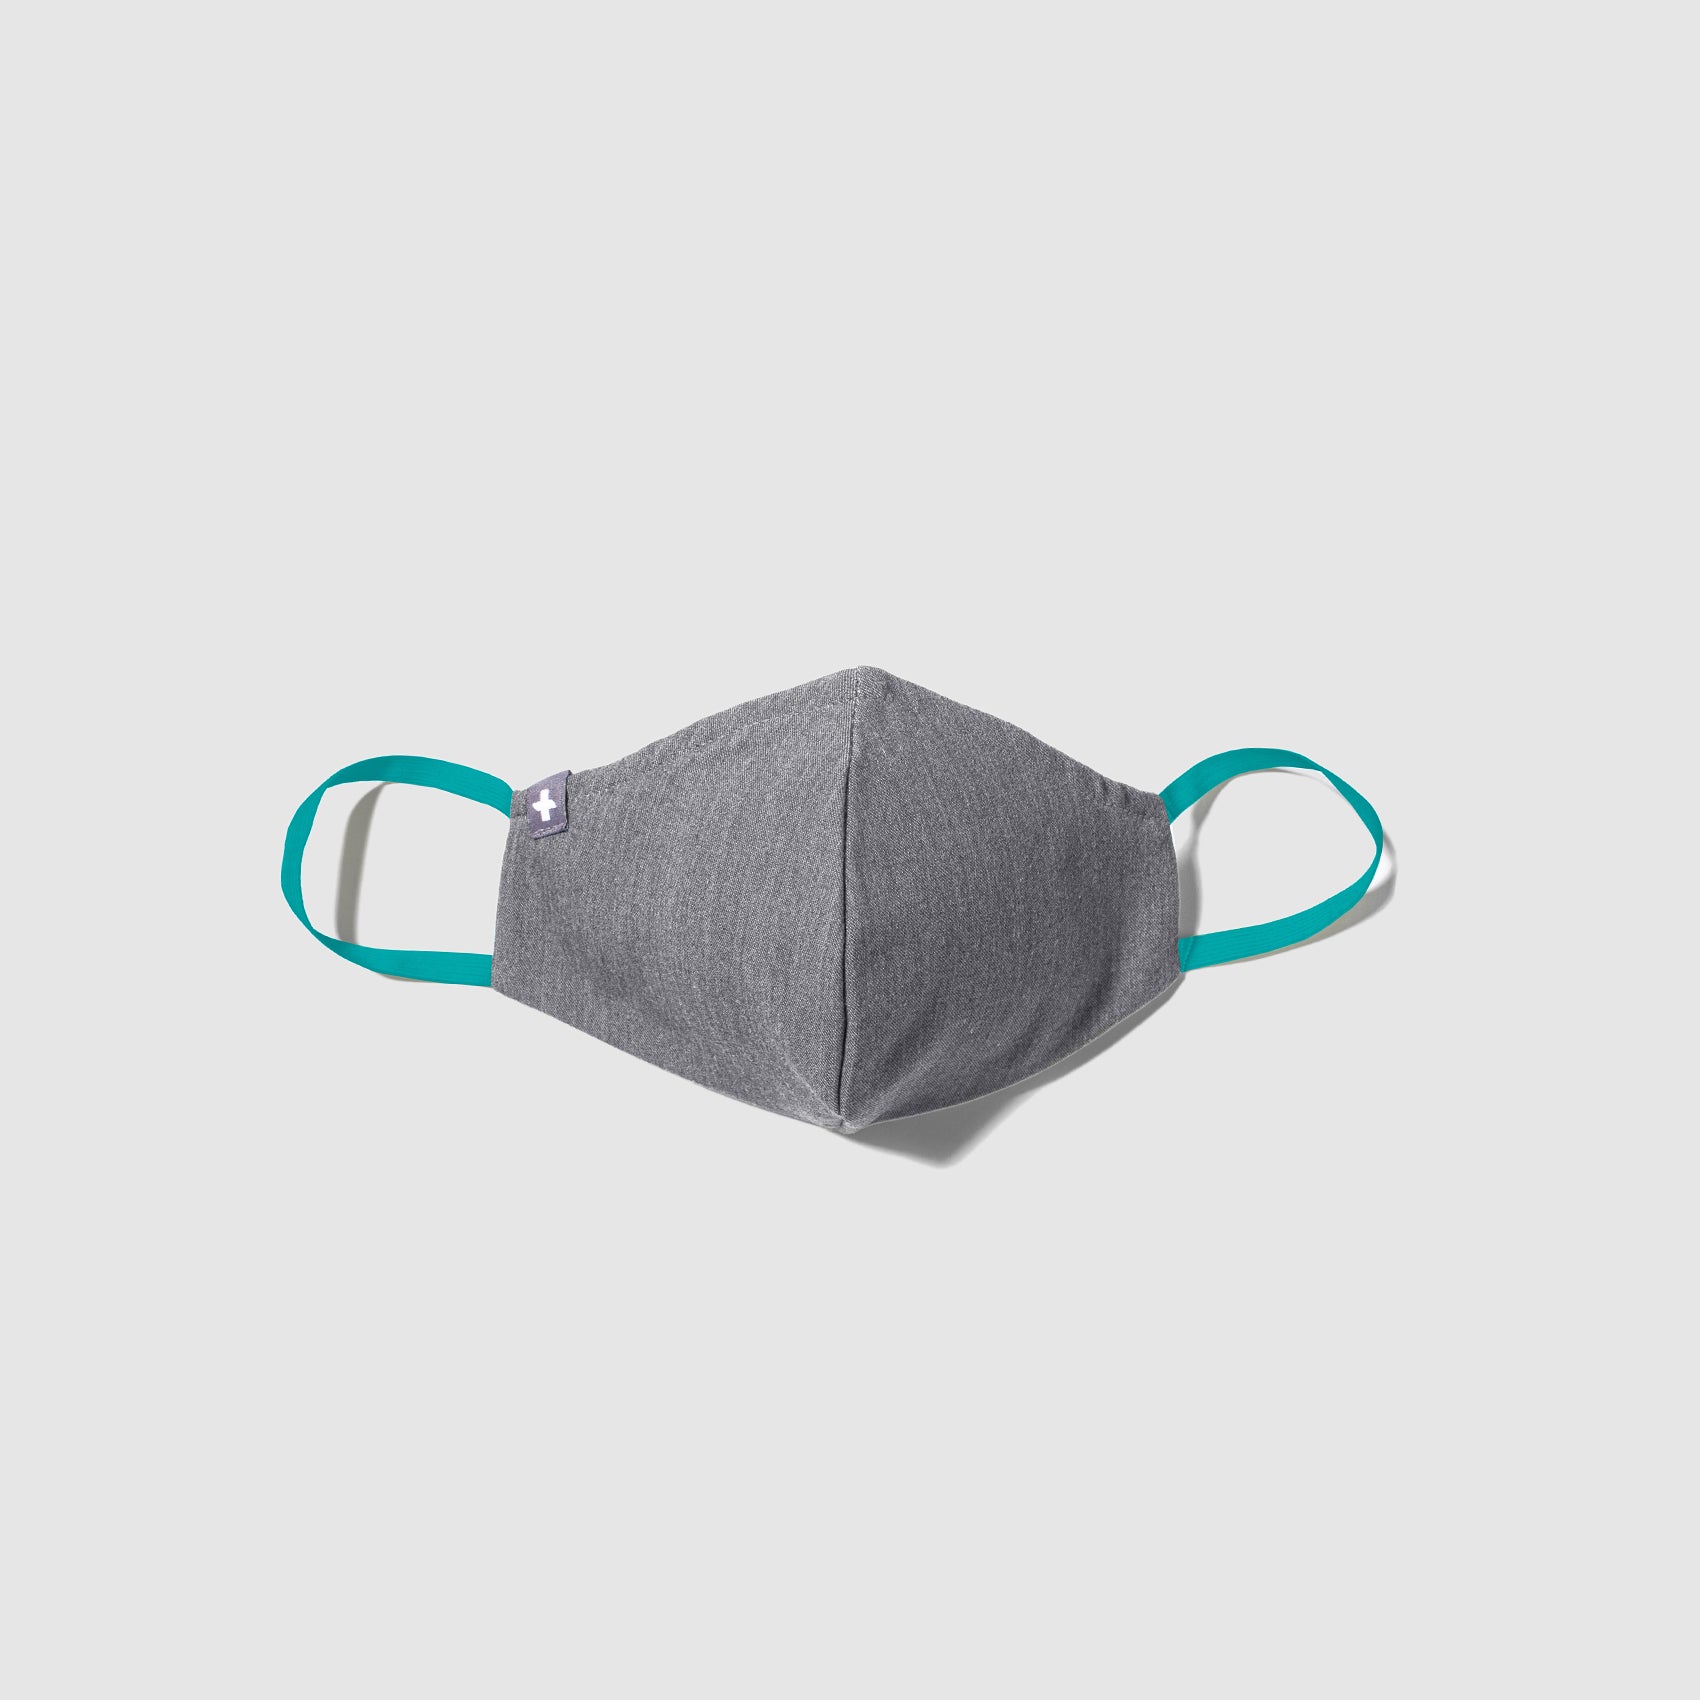 https://cdn.shopify.com/s/files/1/0139/8942/products/FIONx_Protective_Mask-graphite-1.jpg?v=1651072141